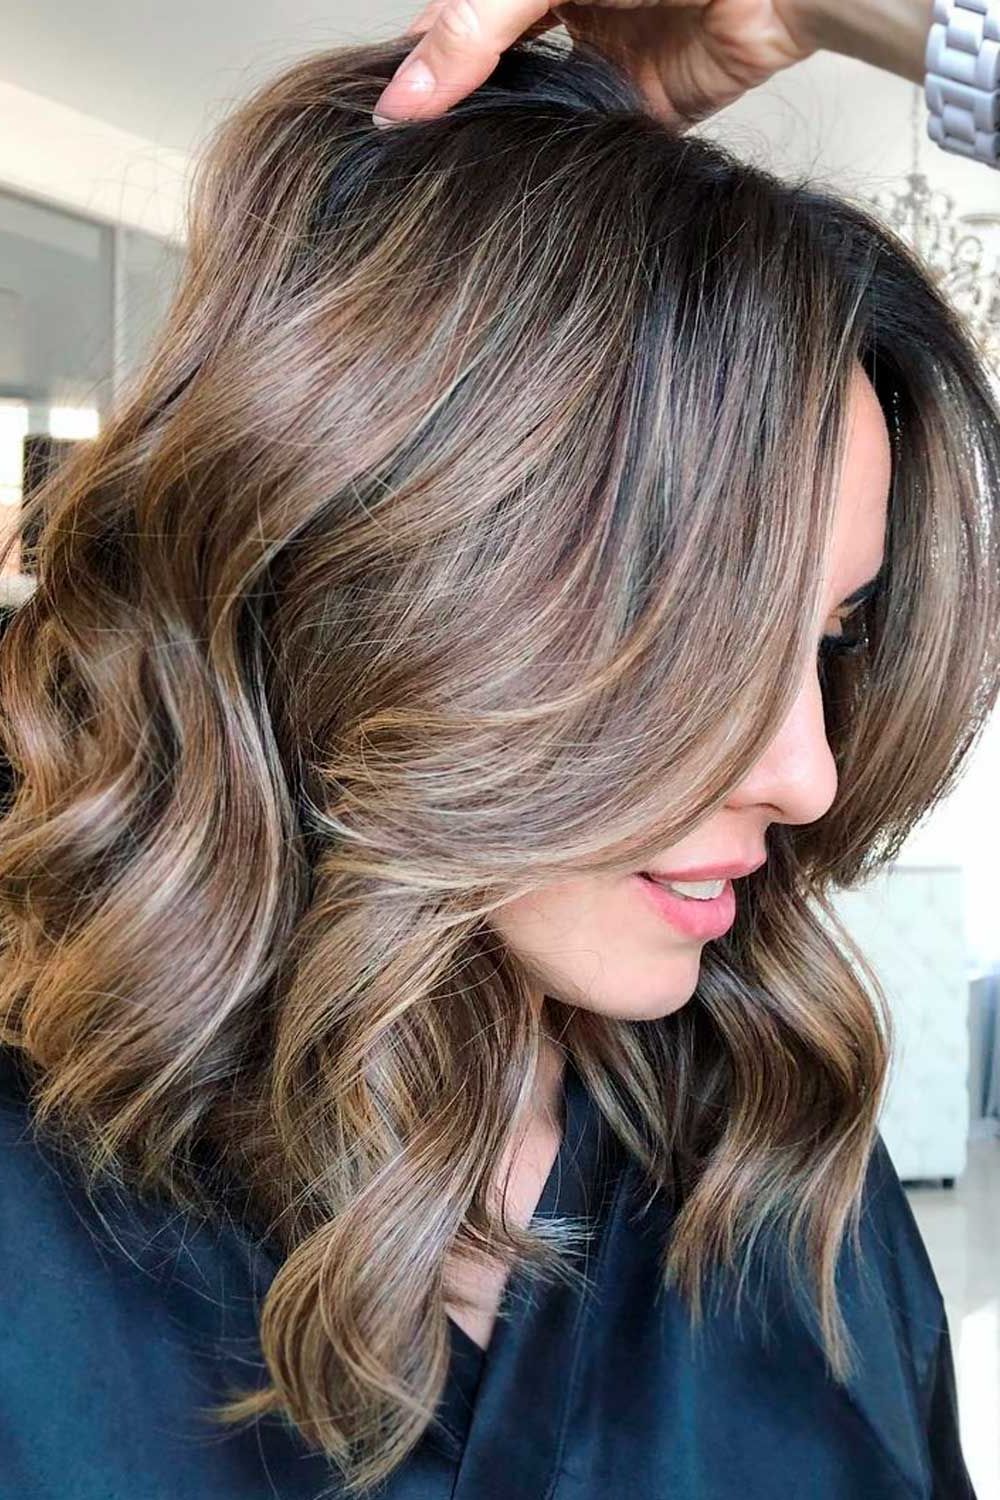 Untraditional Lob Haircut Ideas To Give A Try | Lovehairstyles Throughout Most Up To Date Long Bob Haircuts With Highlights (View 25 of 25)